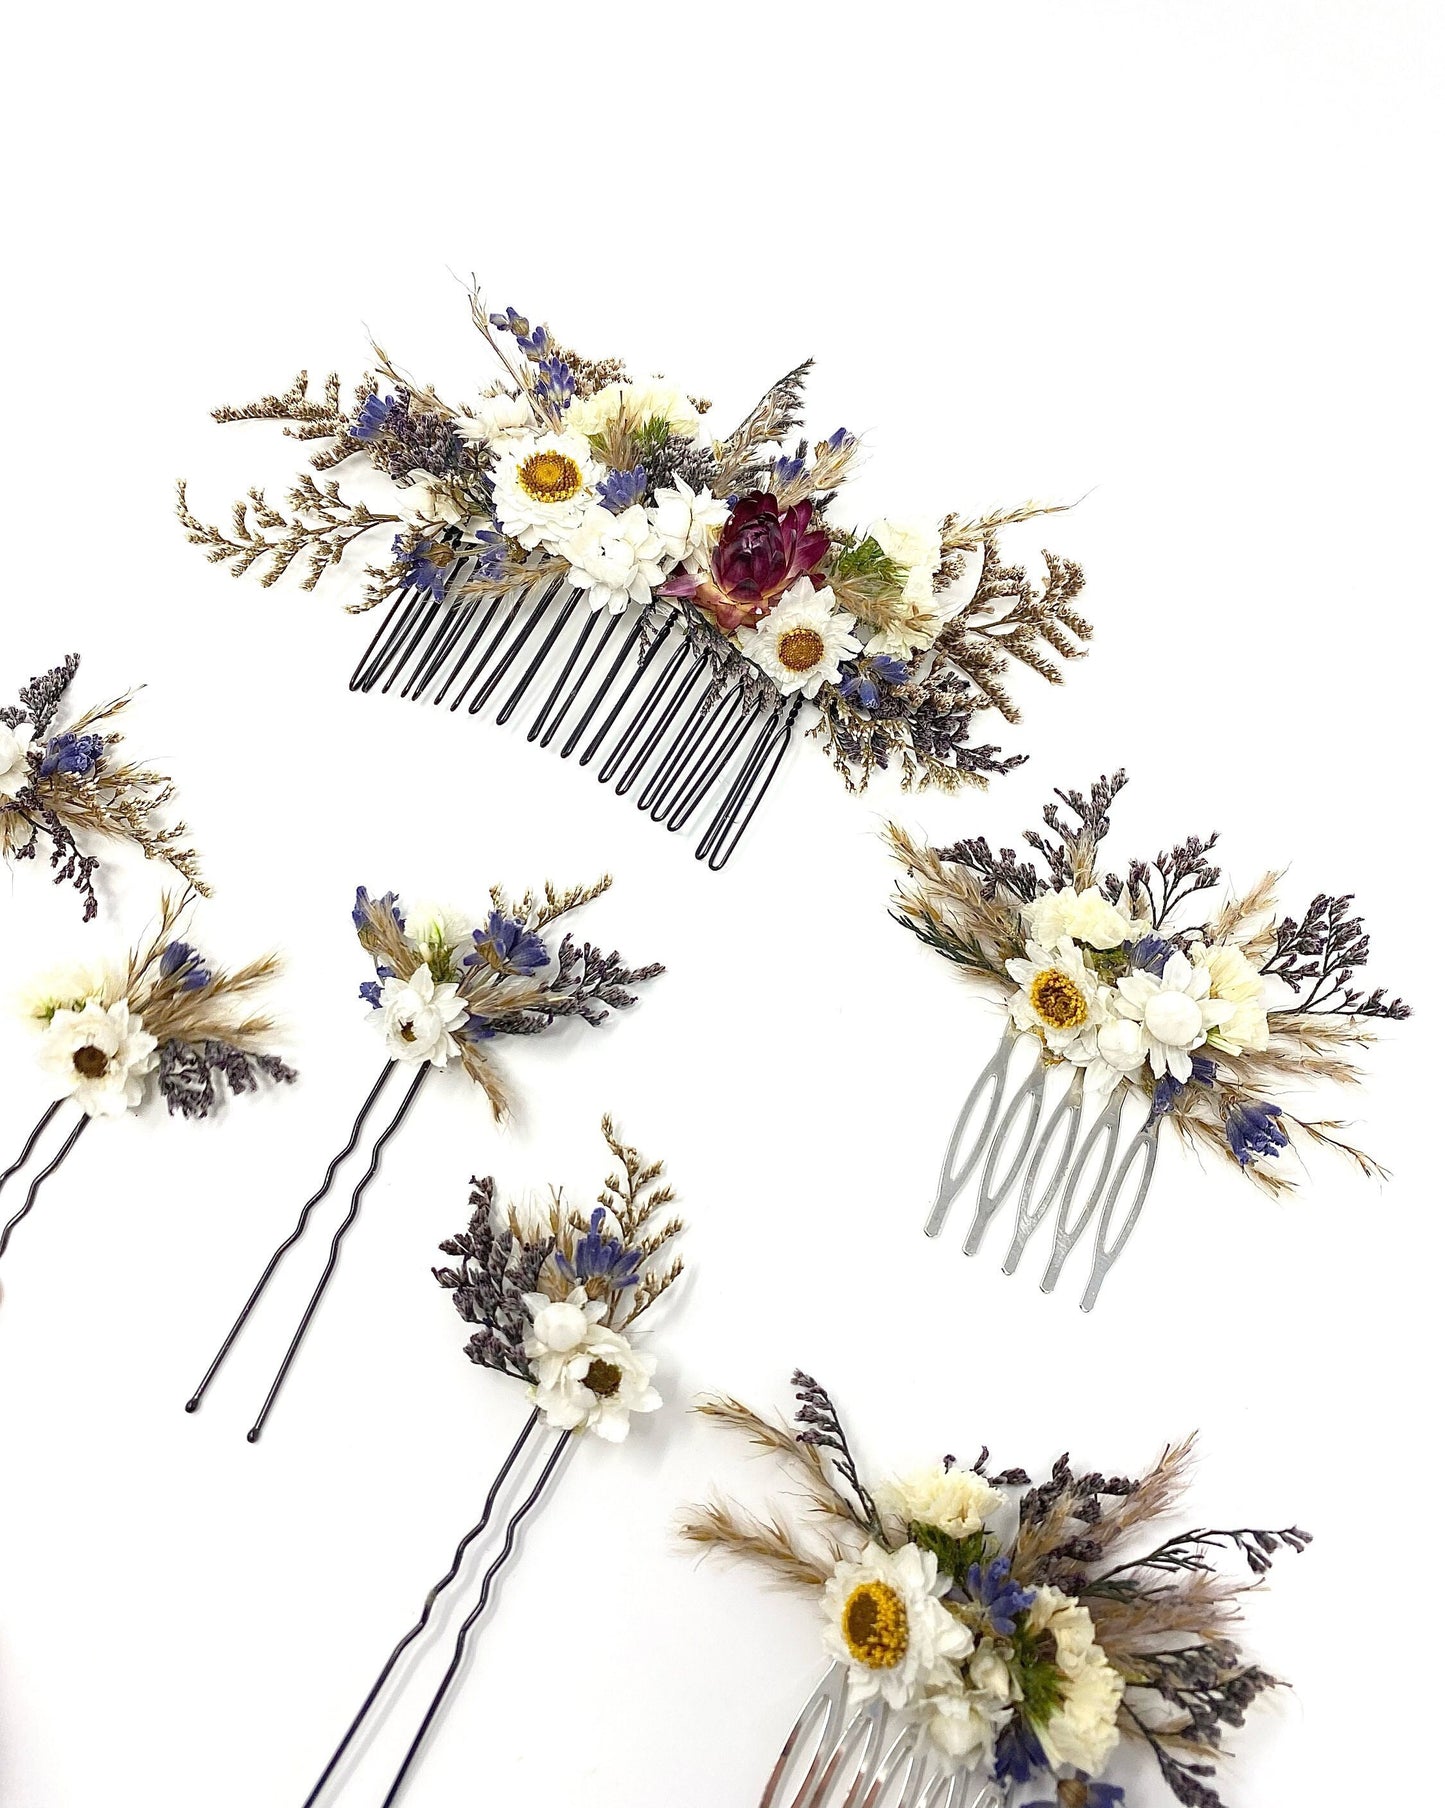 Hair Comb, Hair Pins, Wedding Accessory, Floral Comb, Preserved and Dried Flowers, Cute, Prom, Hair Accessory, Simple, Bridal,